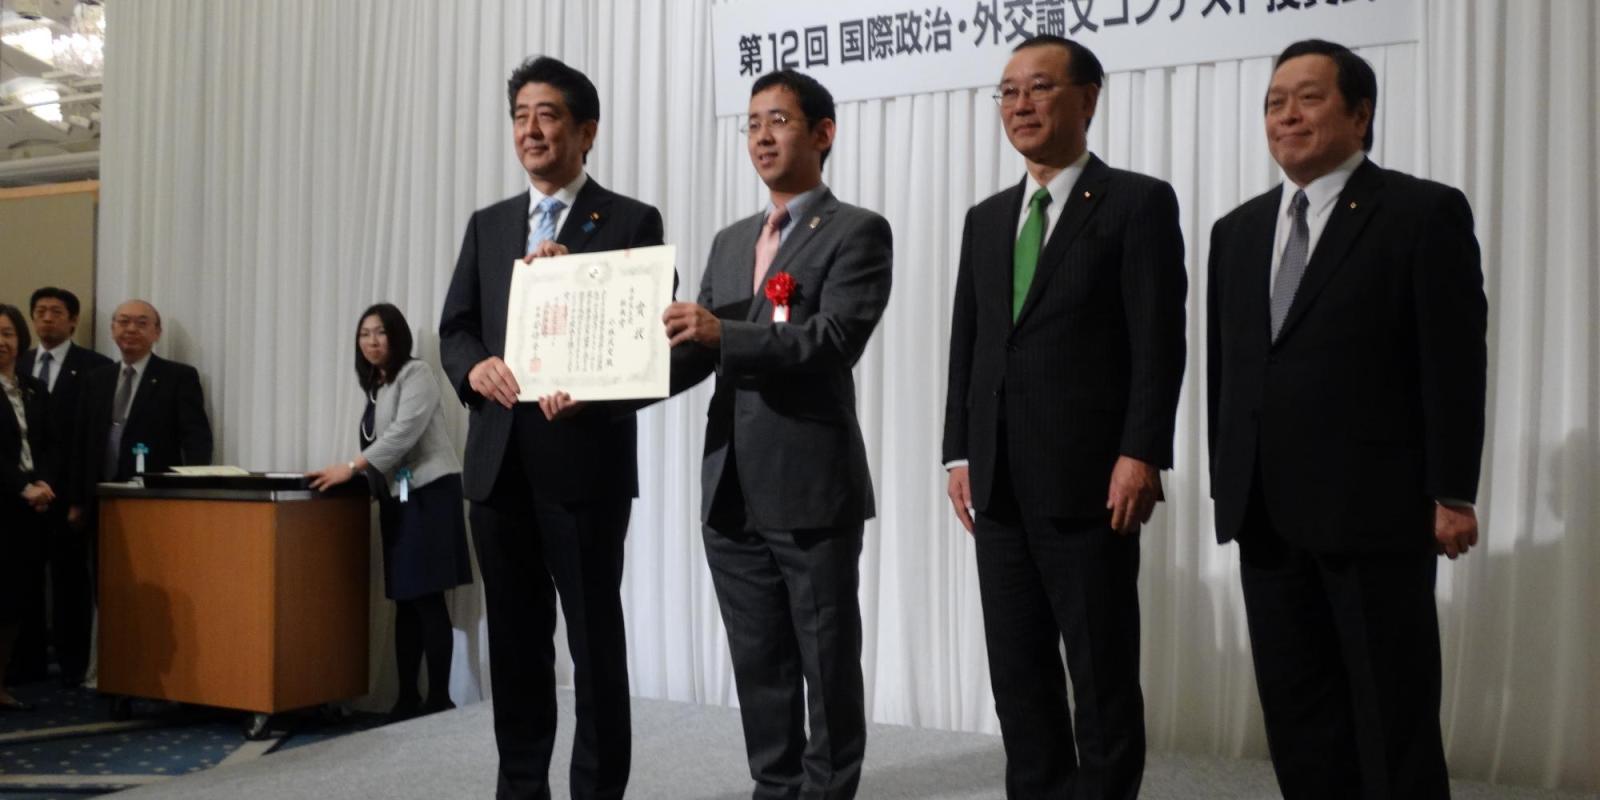 Takeshi Kobayashi awarded by Japanese Prime Minister Shinzō Abe in March for his essay on international relations